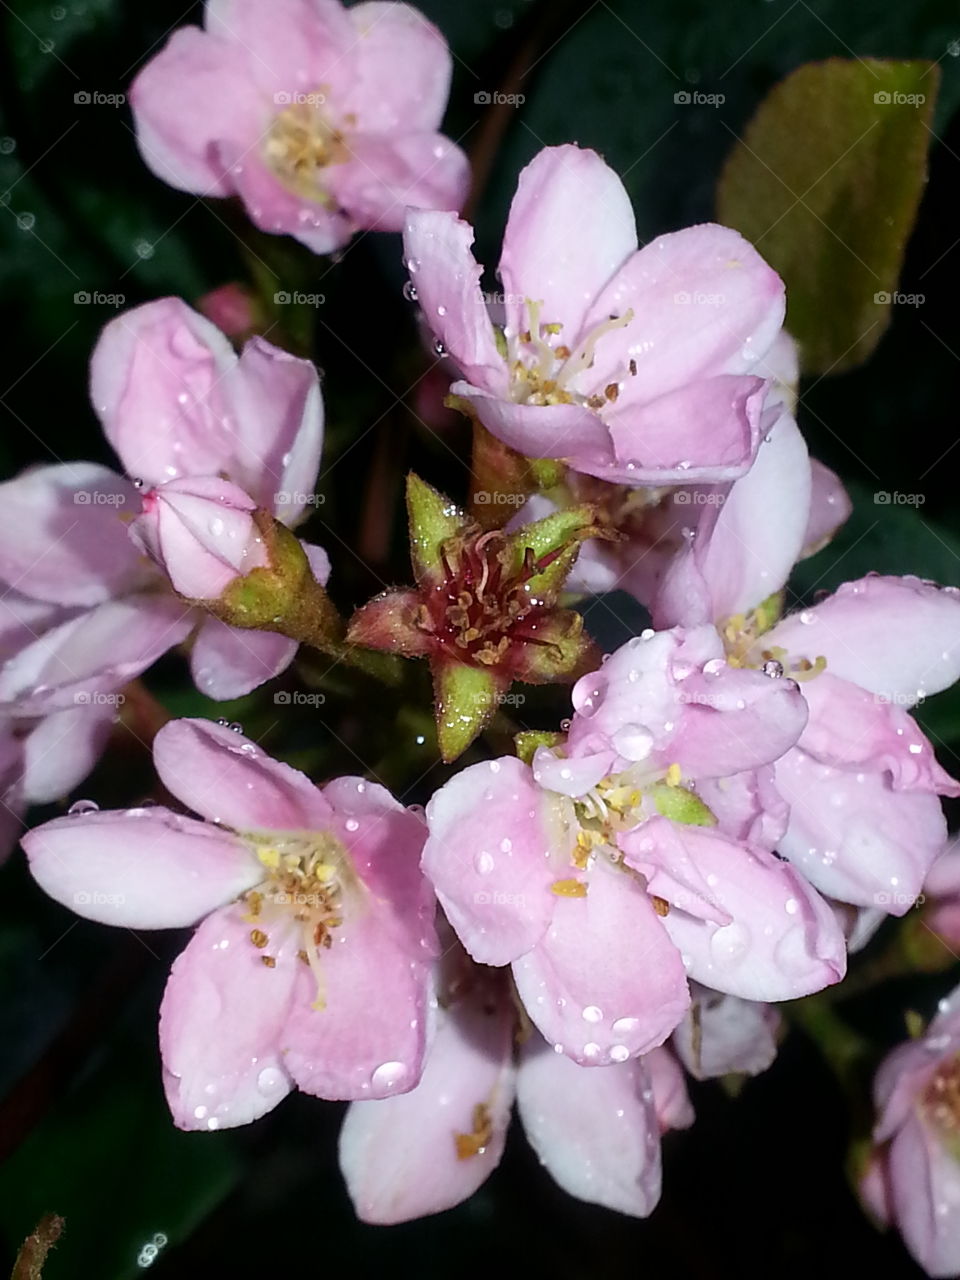 more rain and flowers